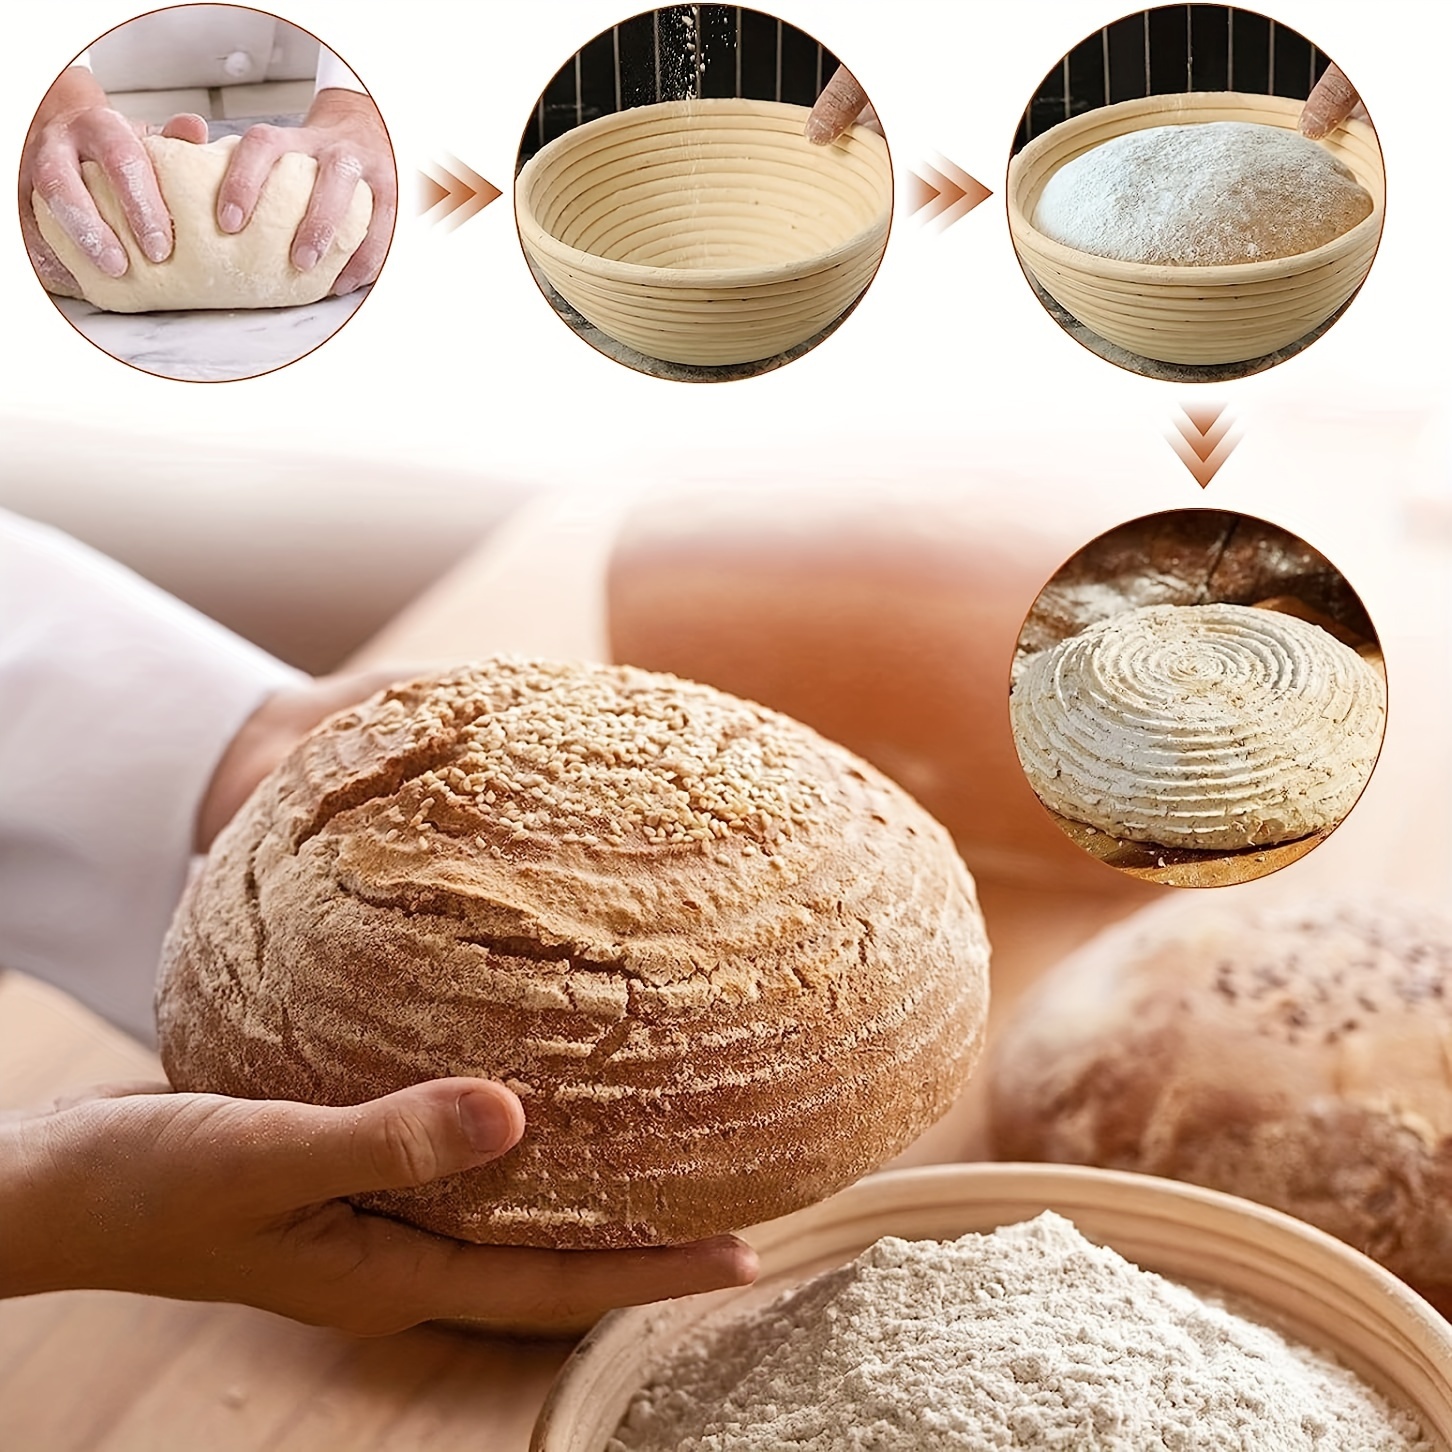 Silicone Bread Proofing Basket, Foldable Bread Basket For Home